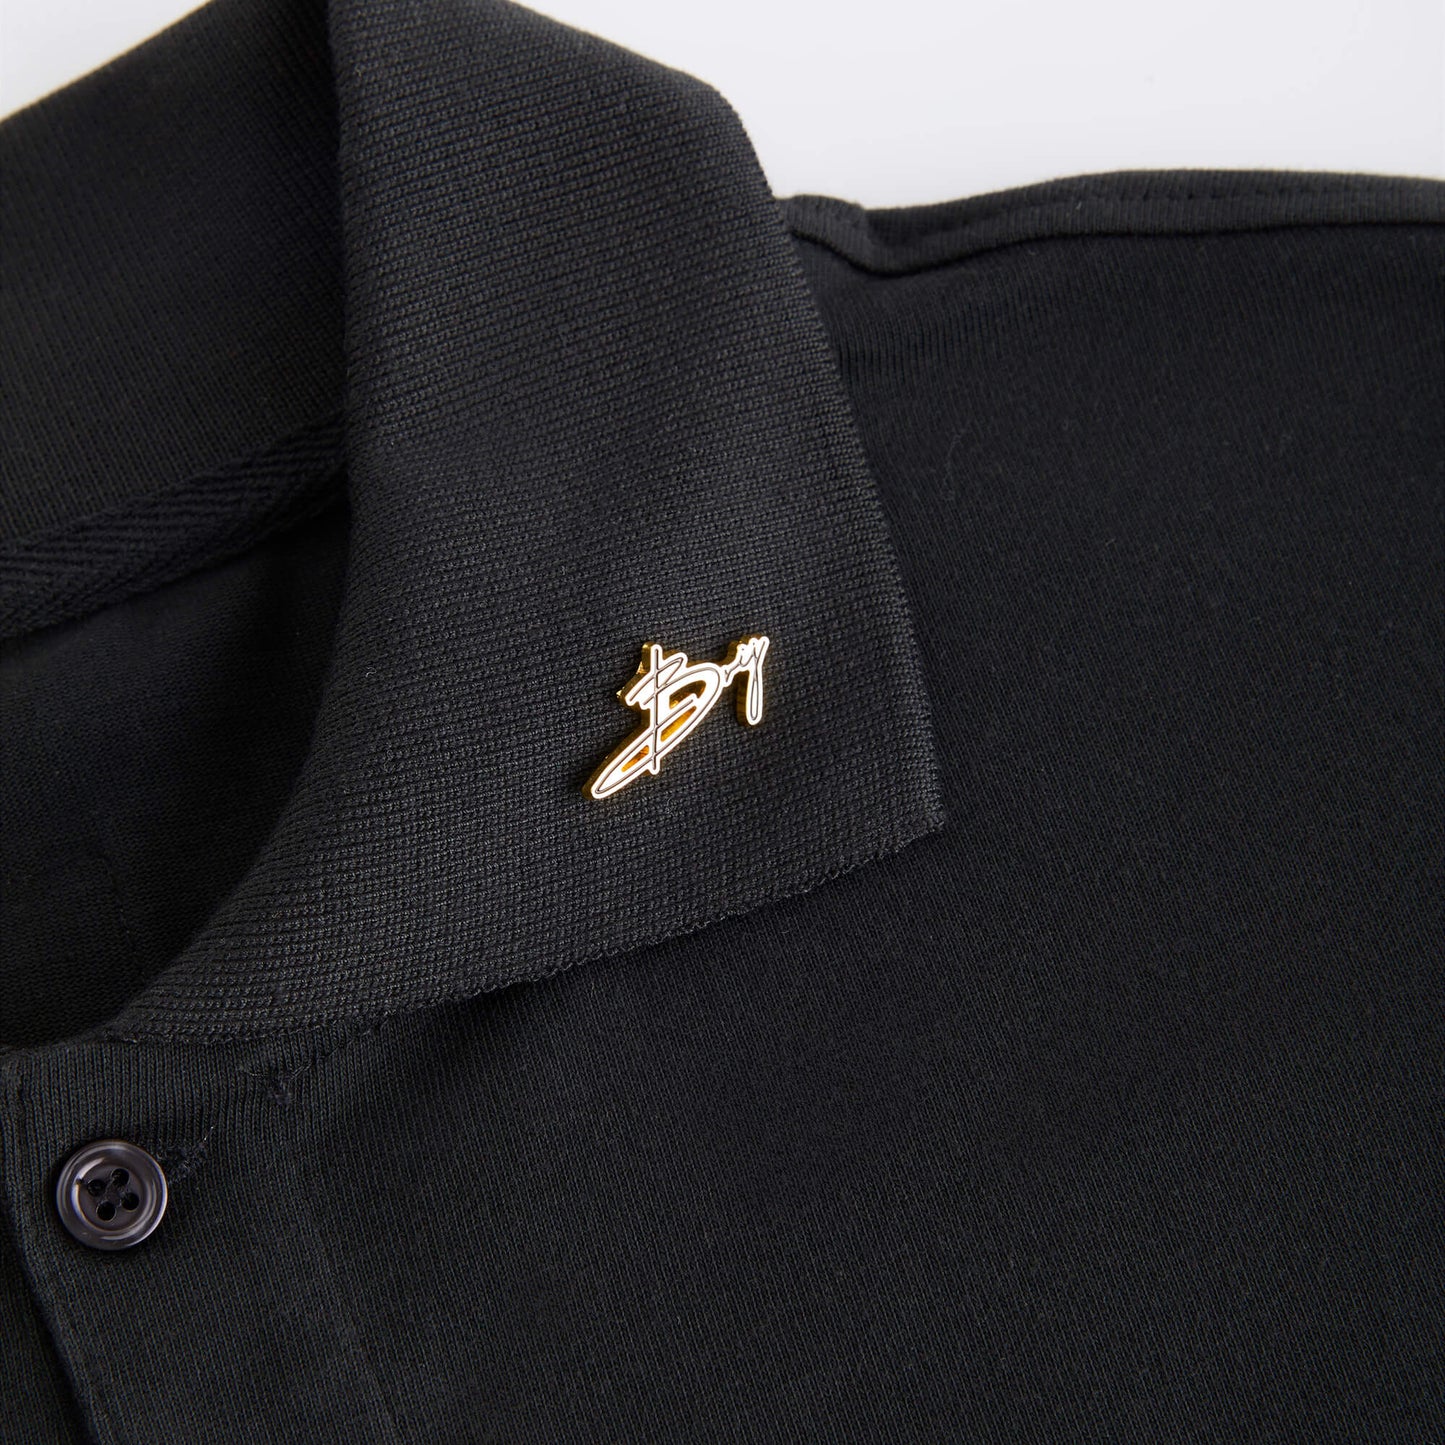 Product 0007 - The Contemporary Polo (Black)